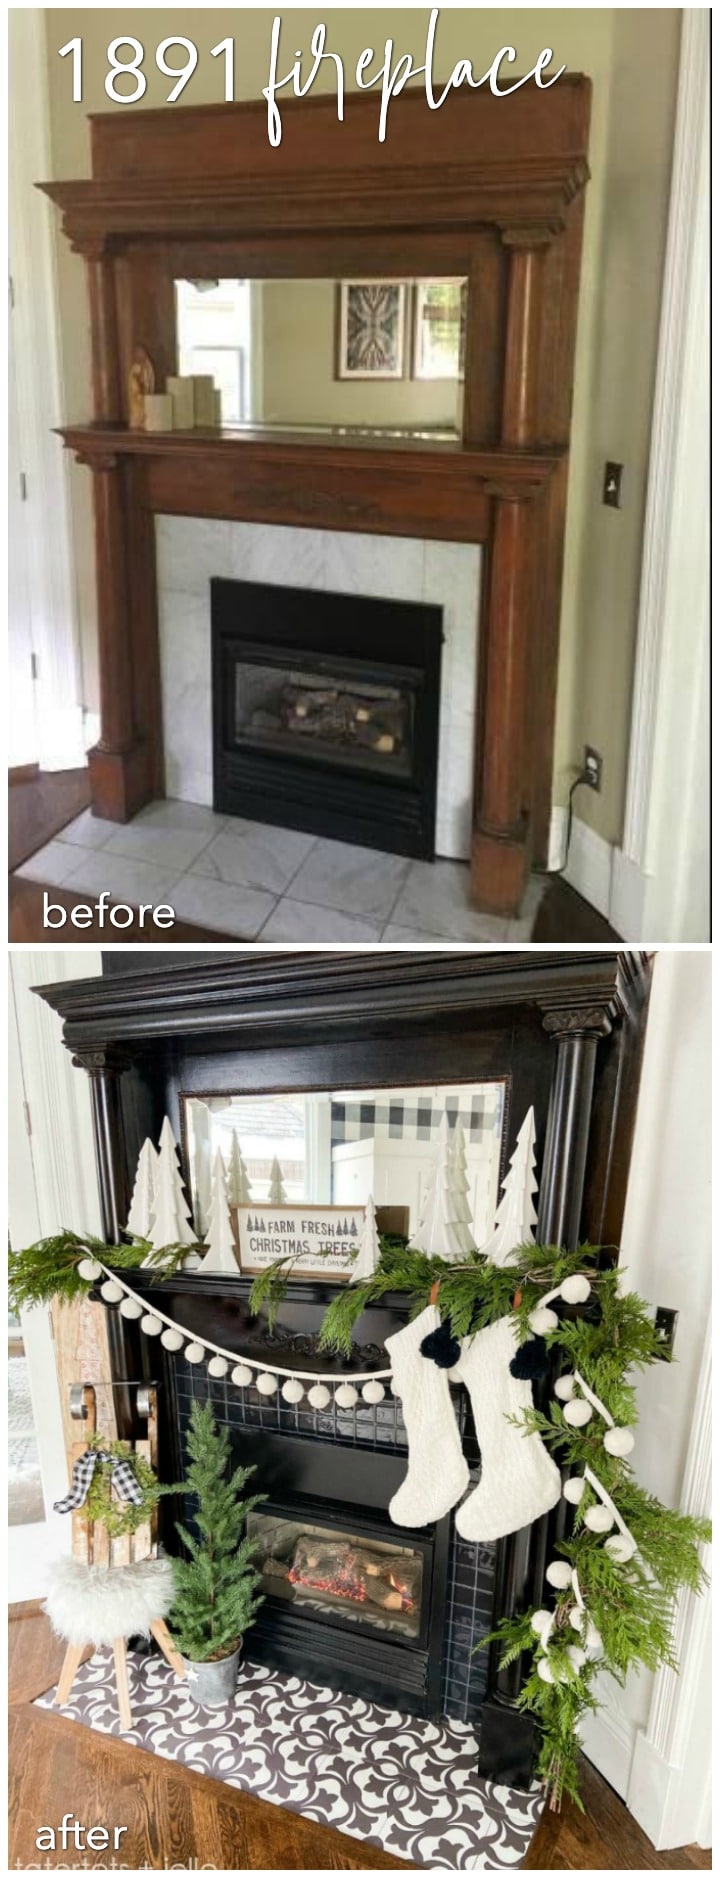 1891 vintage fireplace makeover before and after restoration for less than $200.